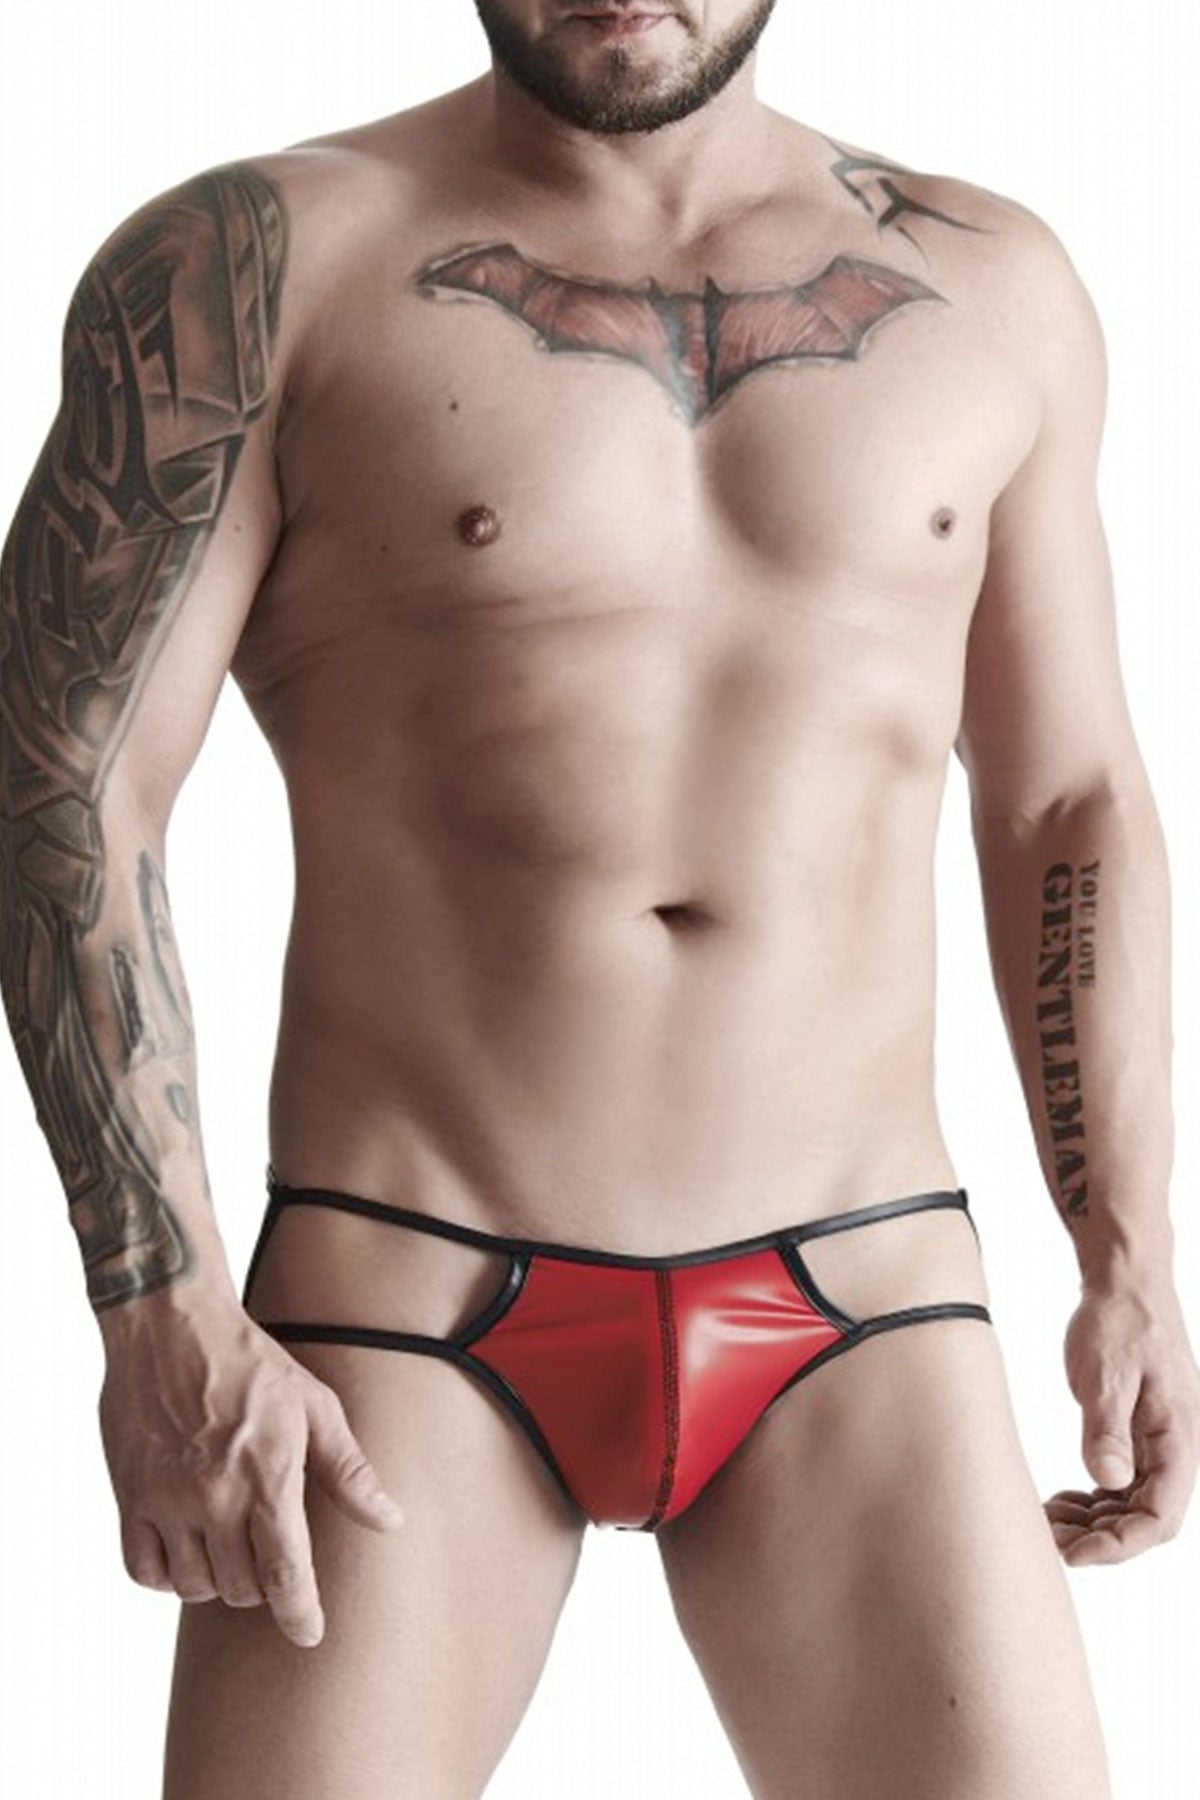 Backless Briefs by CRD Fetish Lingerie Red